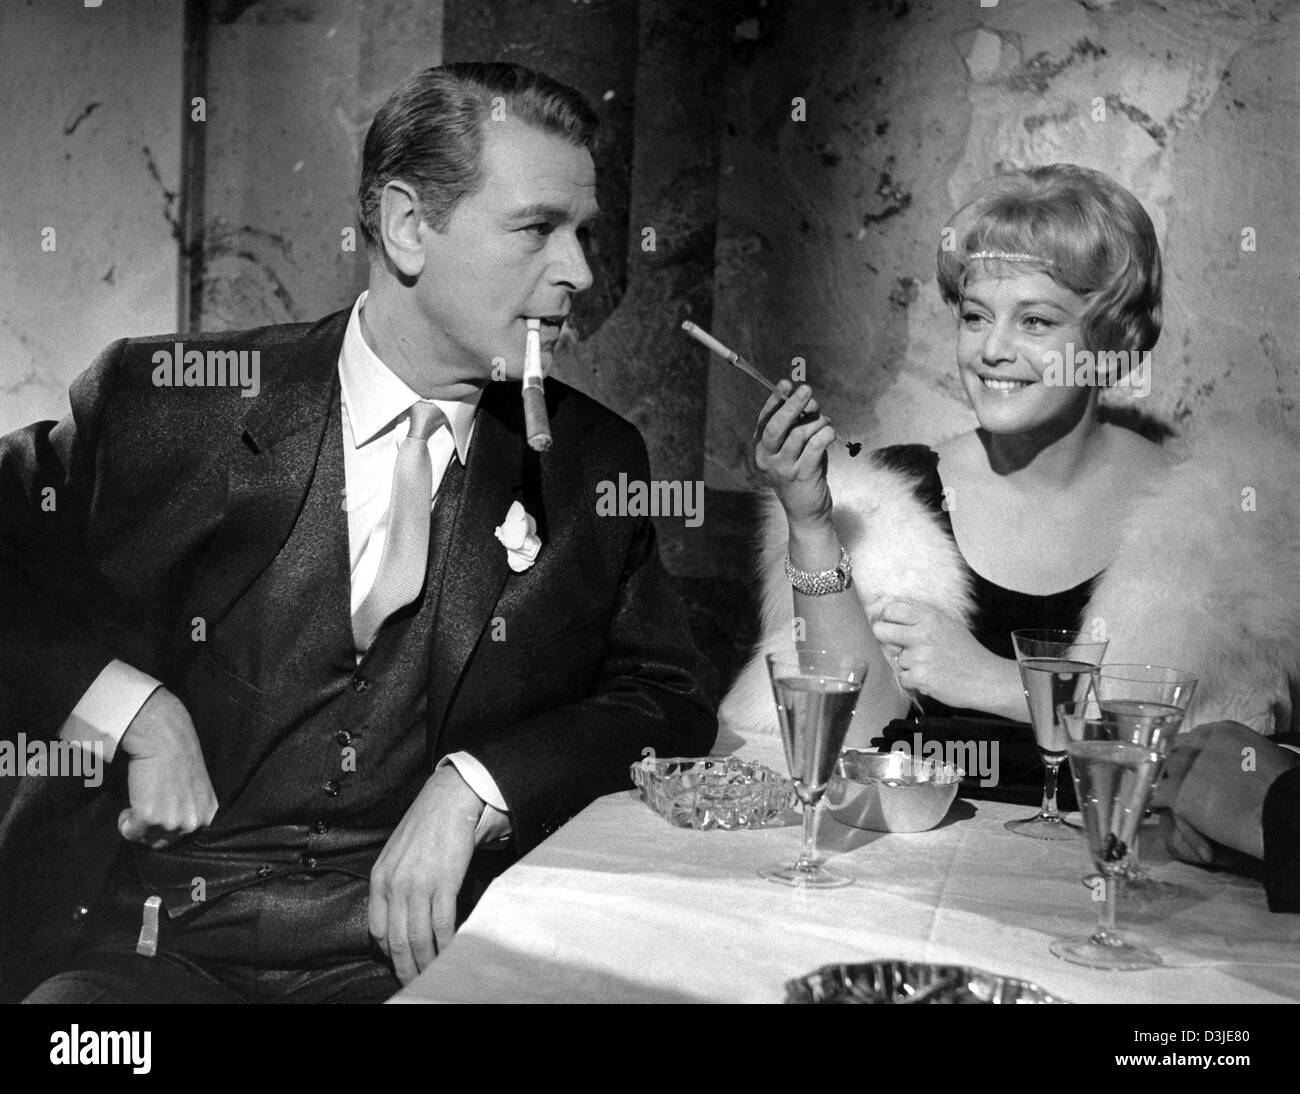 (dpa file) - Austrian actors O.W. Fischer (L) and Maria Schell smoke cigarettes in a movie still from 'Das Riesenrad' (The Ferries wheel) in Berlin, Germany, 13 February 1961. Maria Schell passed away due to pneumonia at the age of 79 in Kaernten, Austria, Tuesday 26 April 2005. Her big career began in the 1950's. Stock Photo